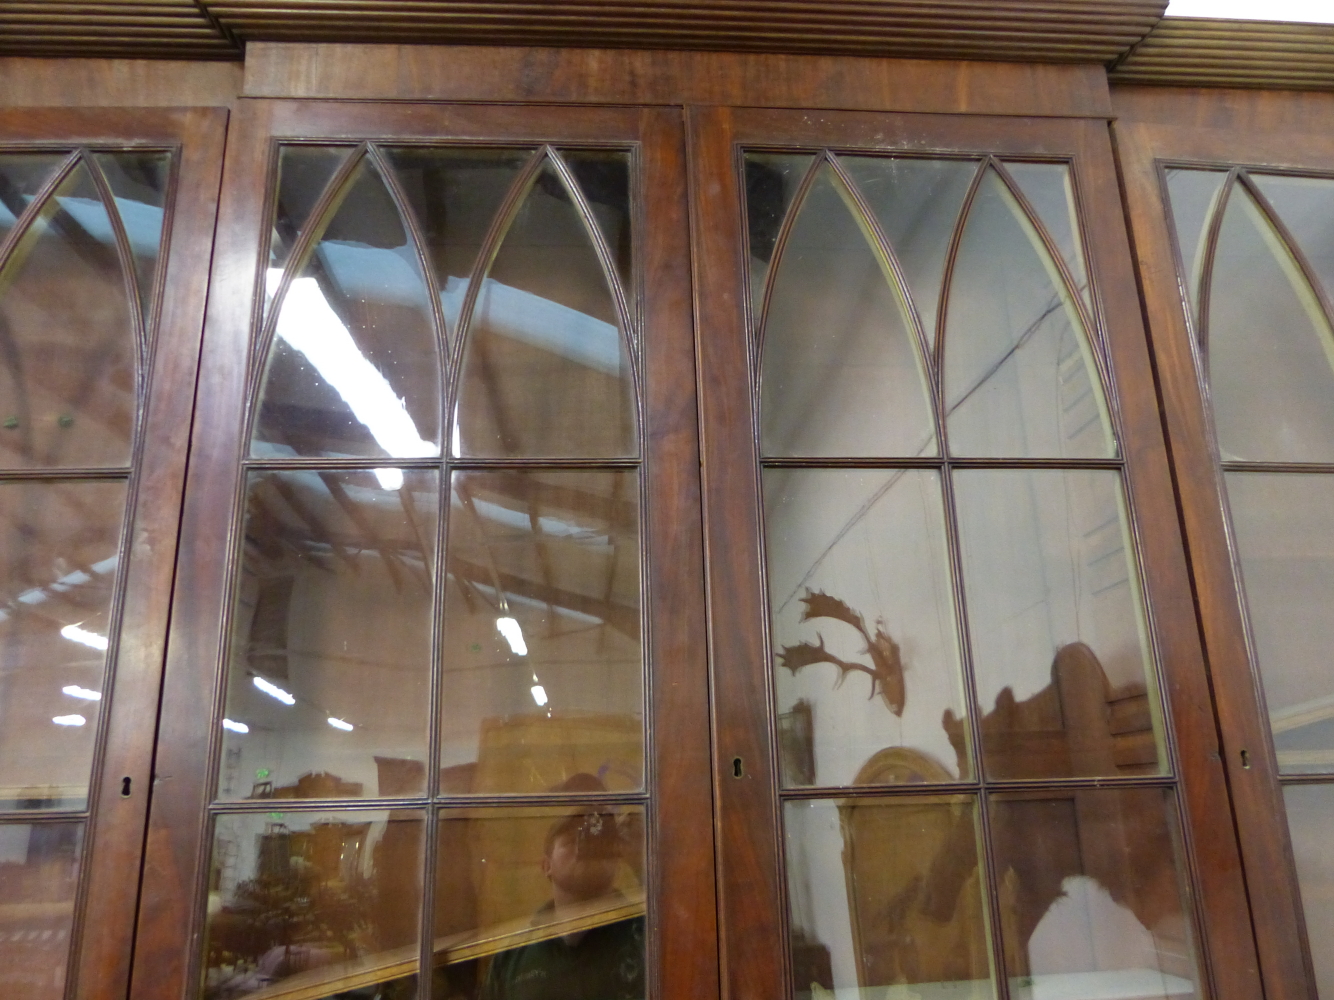 A GEO.III. MAHOGANY SHALLOW BOOKCASE OR APOTHECARY DISPLAY CABINET WITH FOUR GLAZED DOORS OVER PANEL - Image 4 of 6